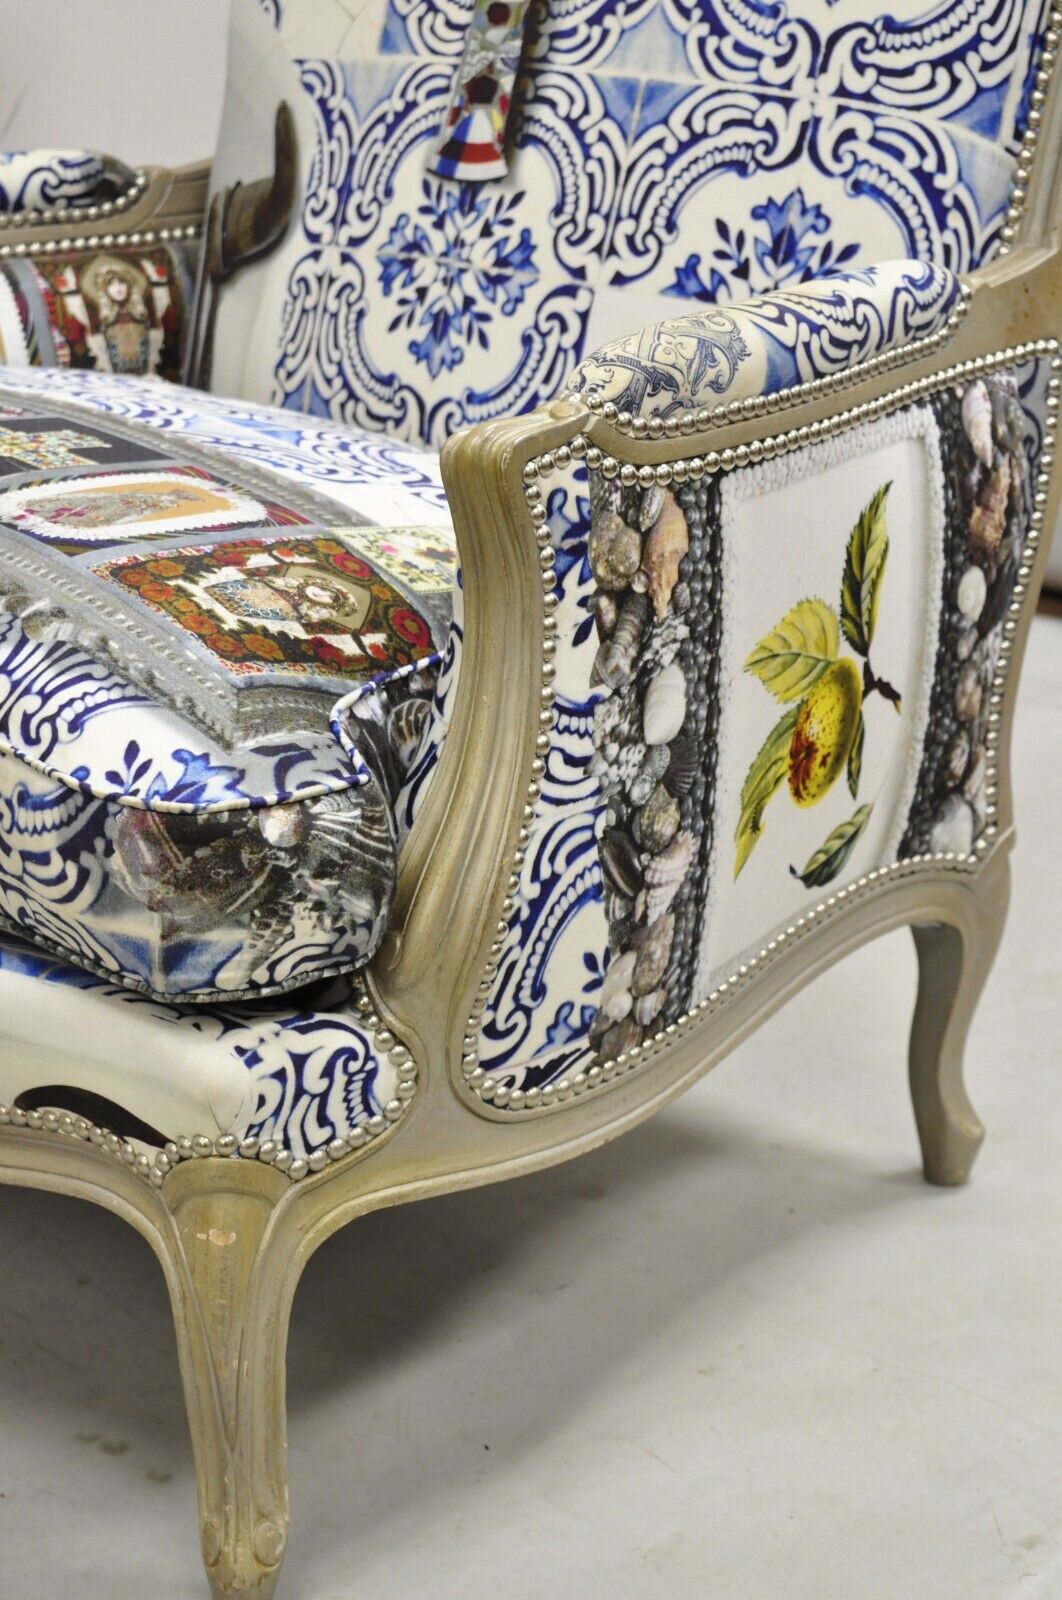 Roche Bobois Mexican Print French Louis XV Style Painted Bergere Arm Chair